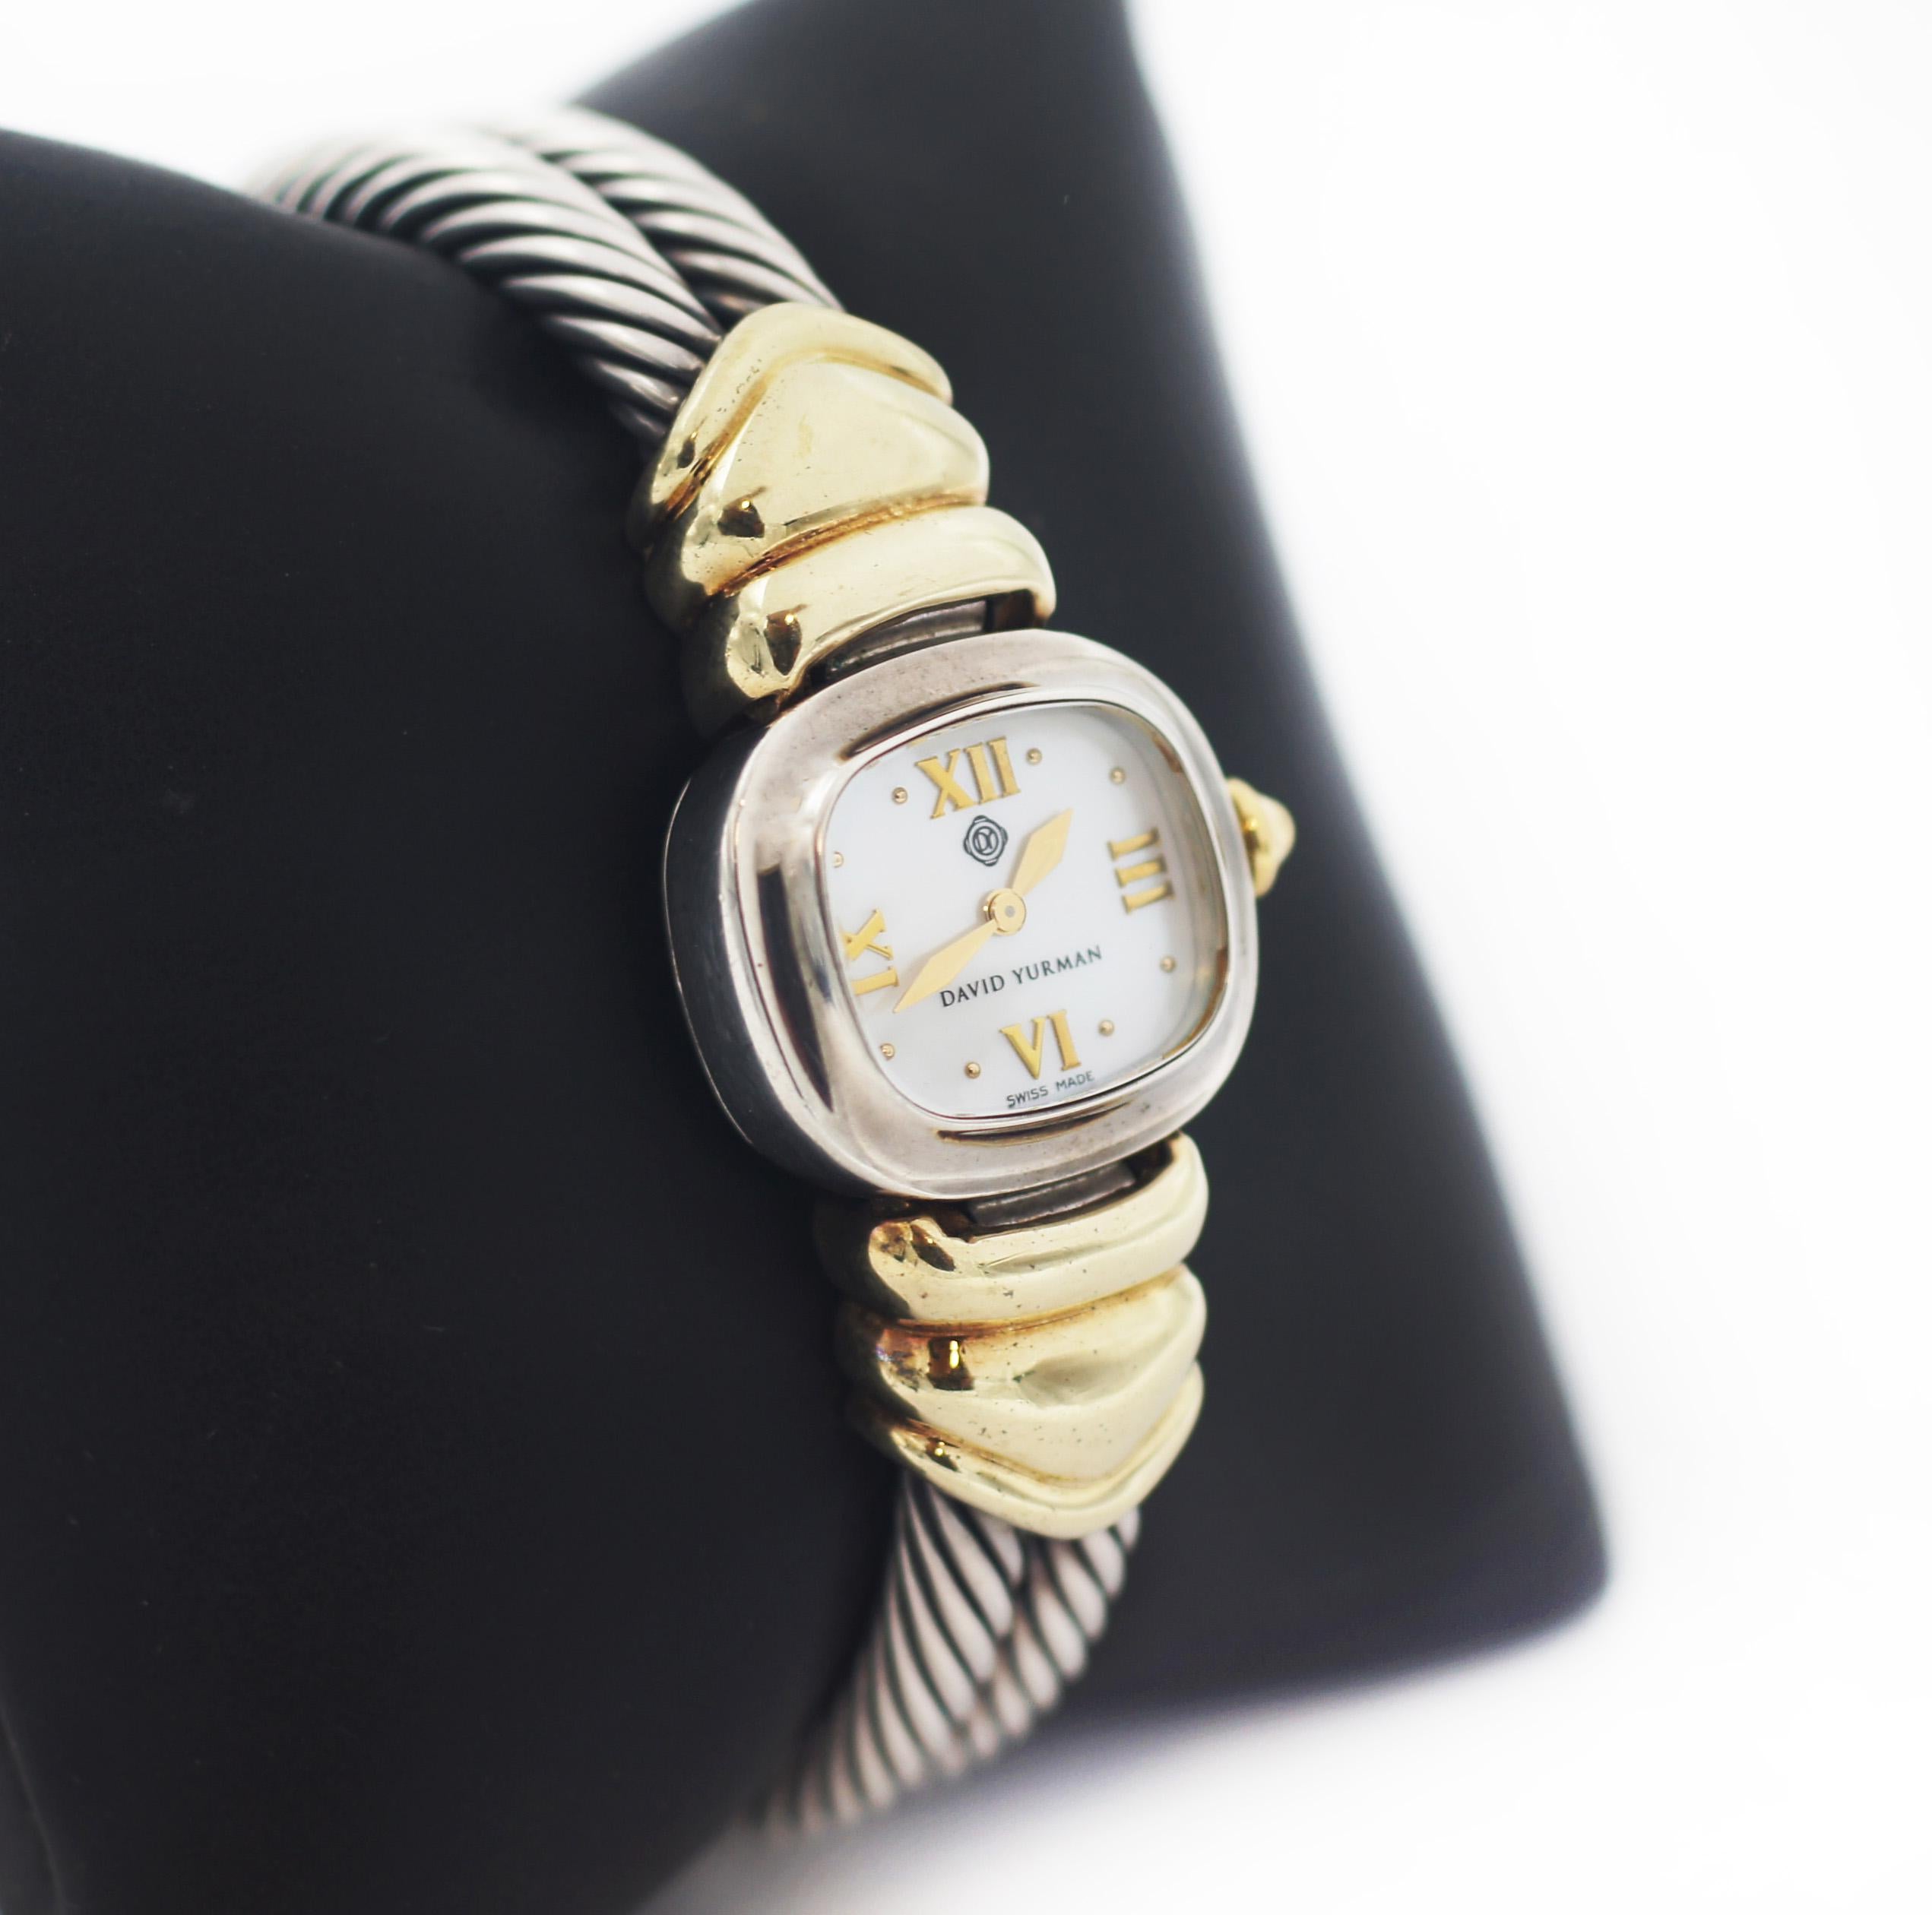 David Yurman,
925 sterling silver with 14k yellow gold accent
double cable band in sterling silver
push in clasp
lugs and crown are in yellow gold
Mother of Pearl Dial
Gold Roman numeral hour markers and hands
Gold crown
Sapphire crystal
Quartz